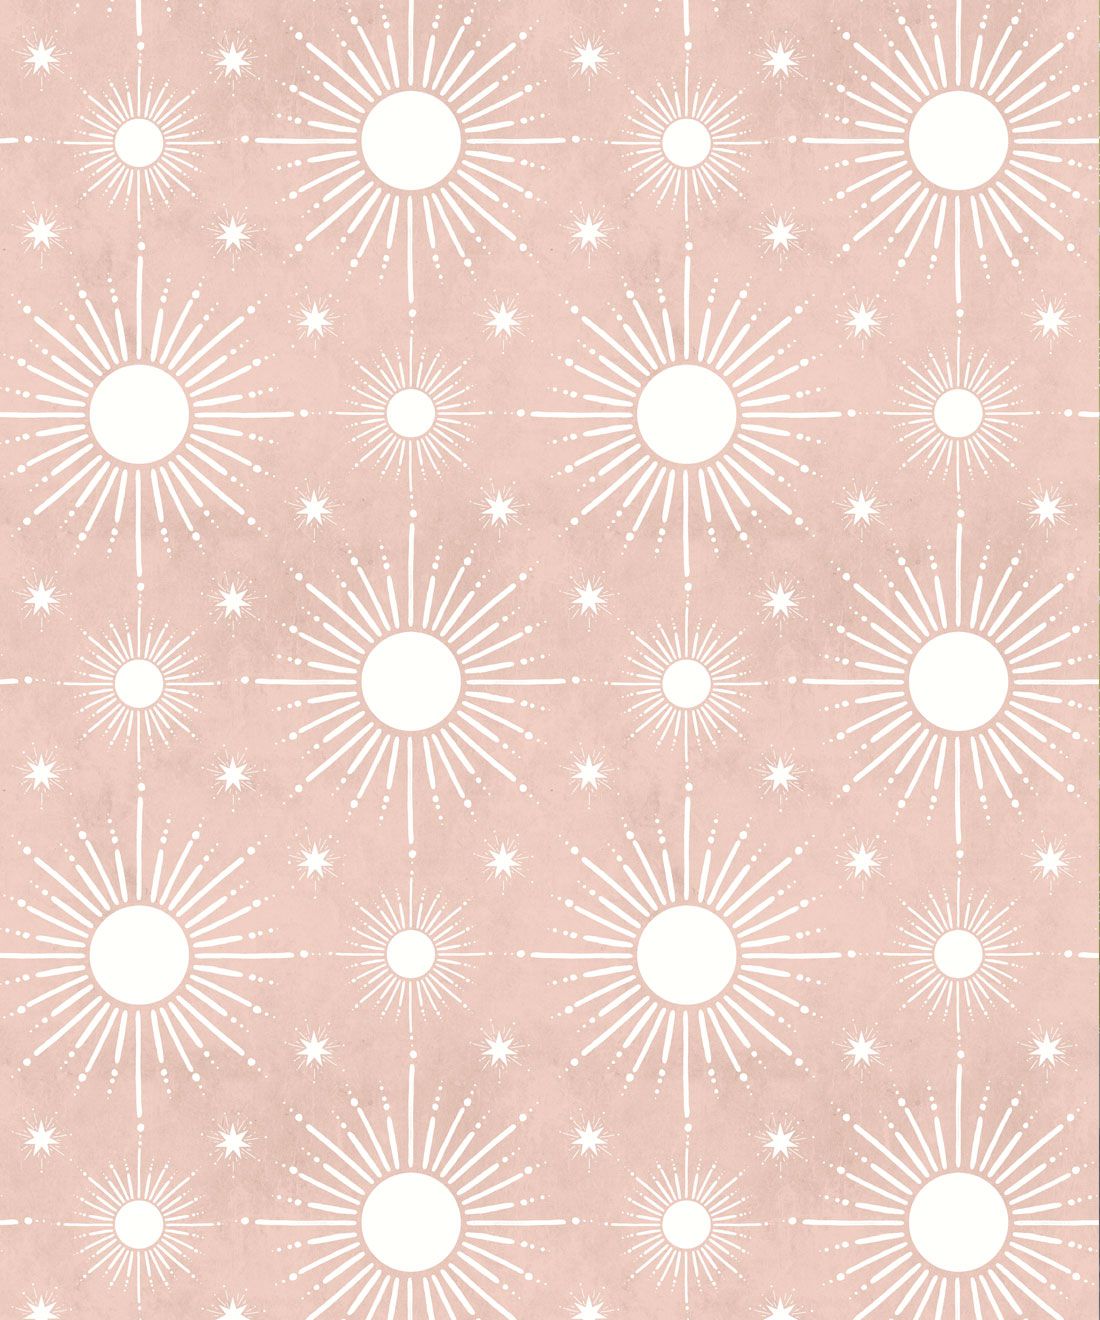 Pattern of white suns and stars on a pink background - Hot pink, salmon, light brown, light pink